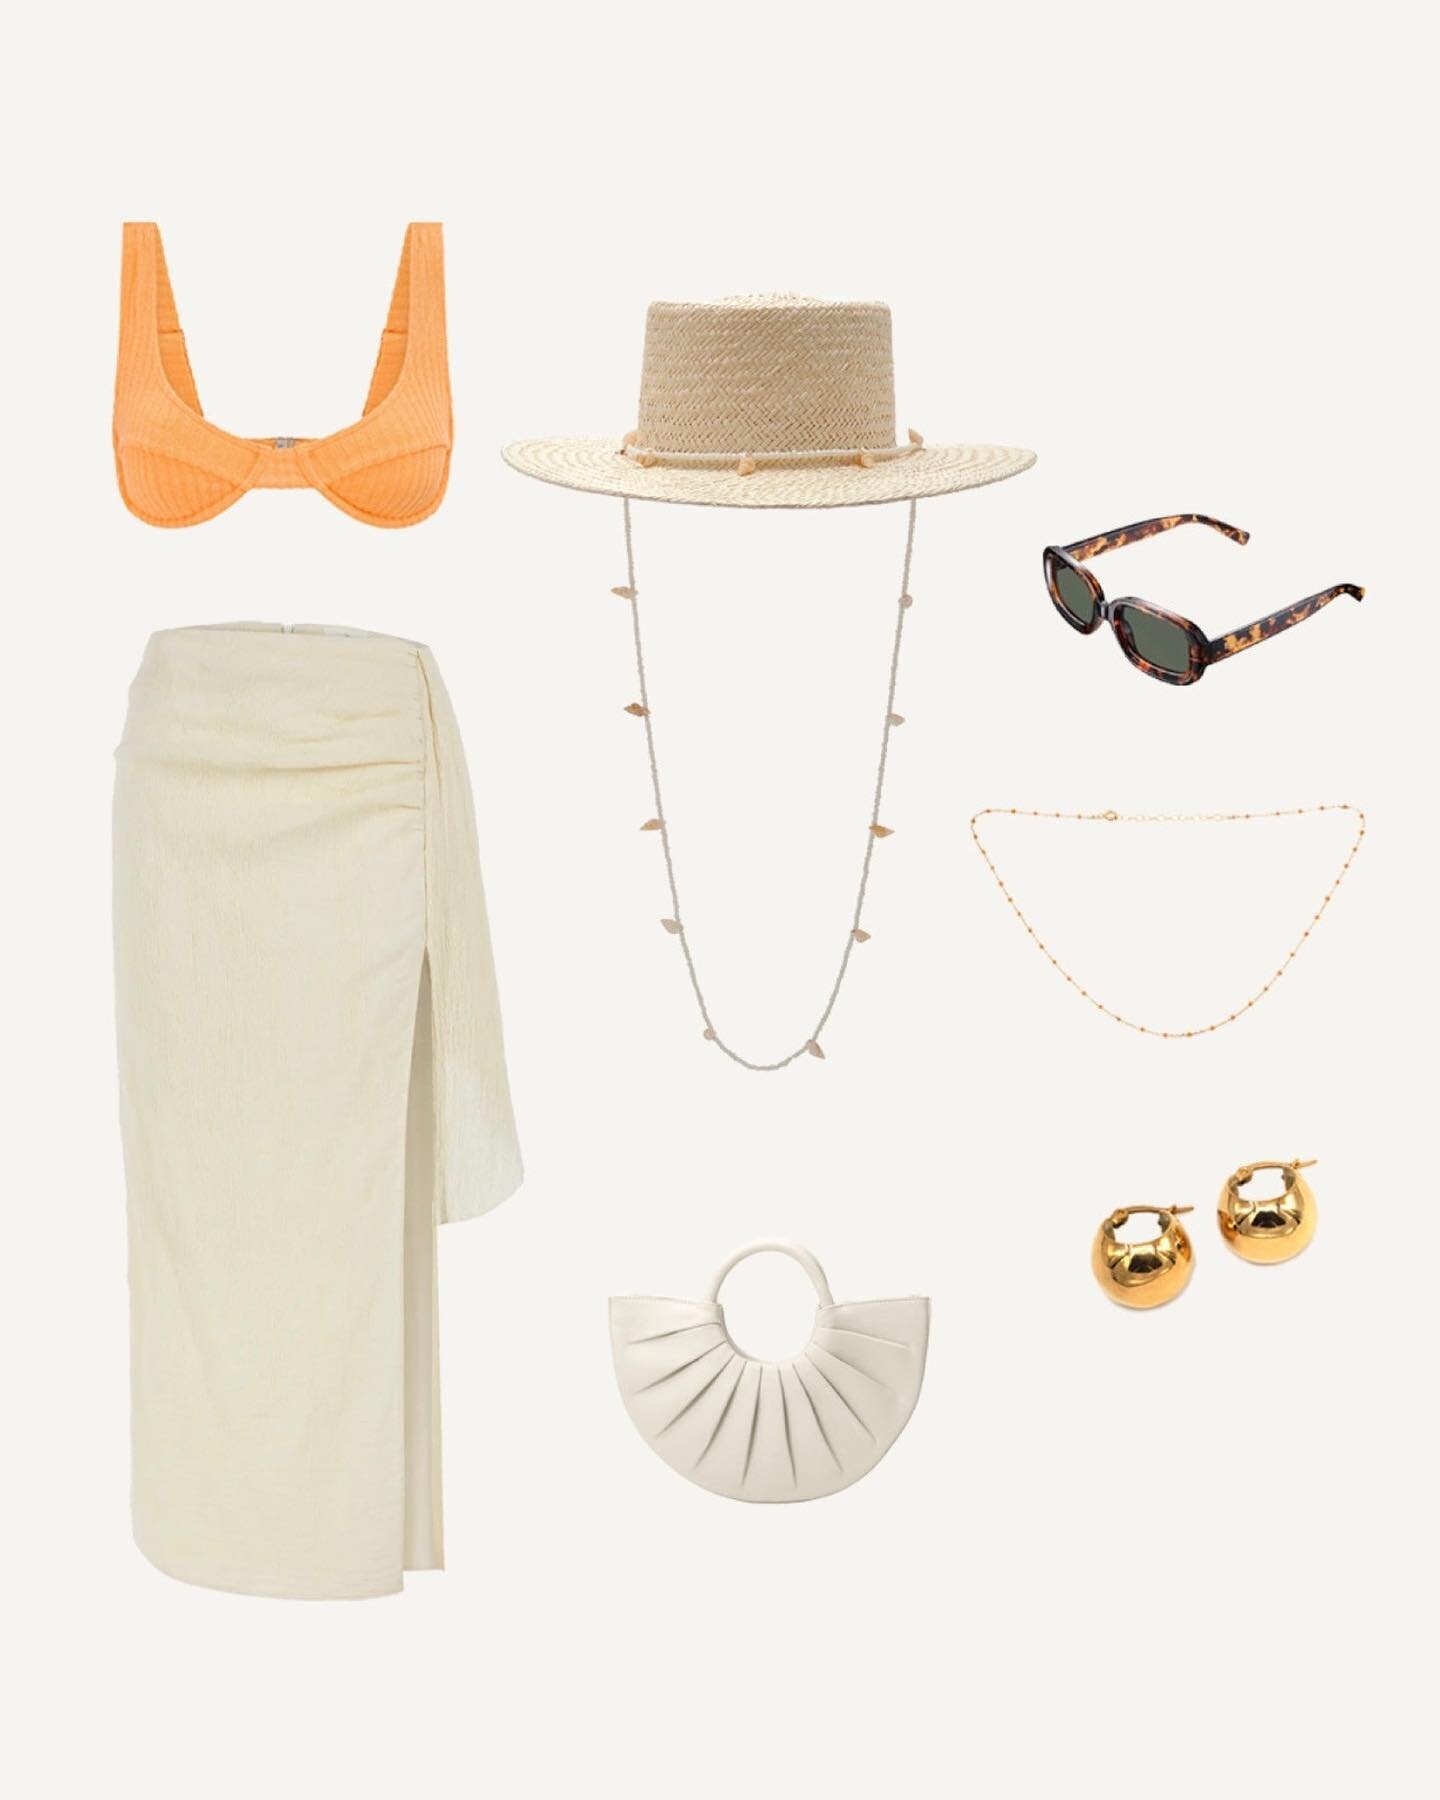 Summer Vibes ☀️ from @heedliving. Stop by and see what&rsquo;s new in store  #summeroutfit #vacayvibes #islamorada #floridakeys #islamoradashopping #scoopguideislamorada